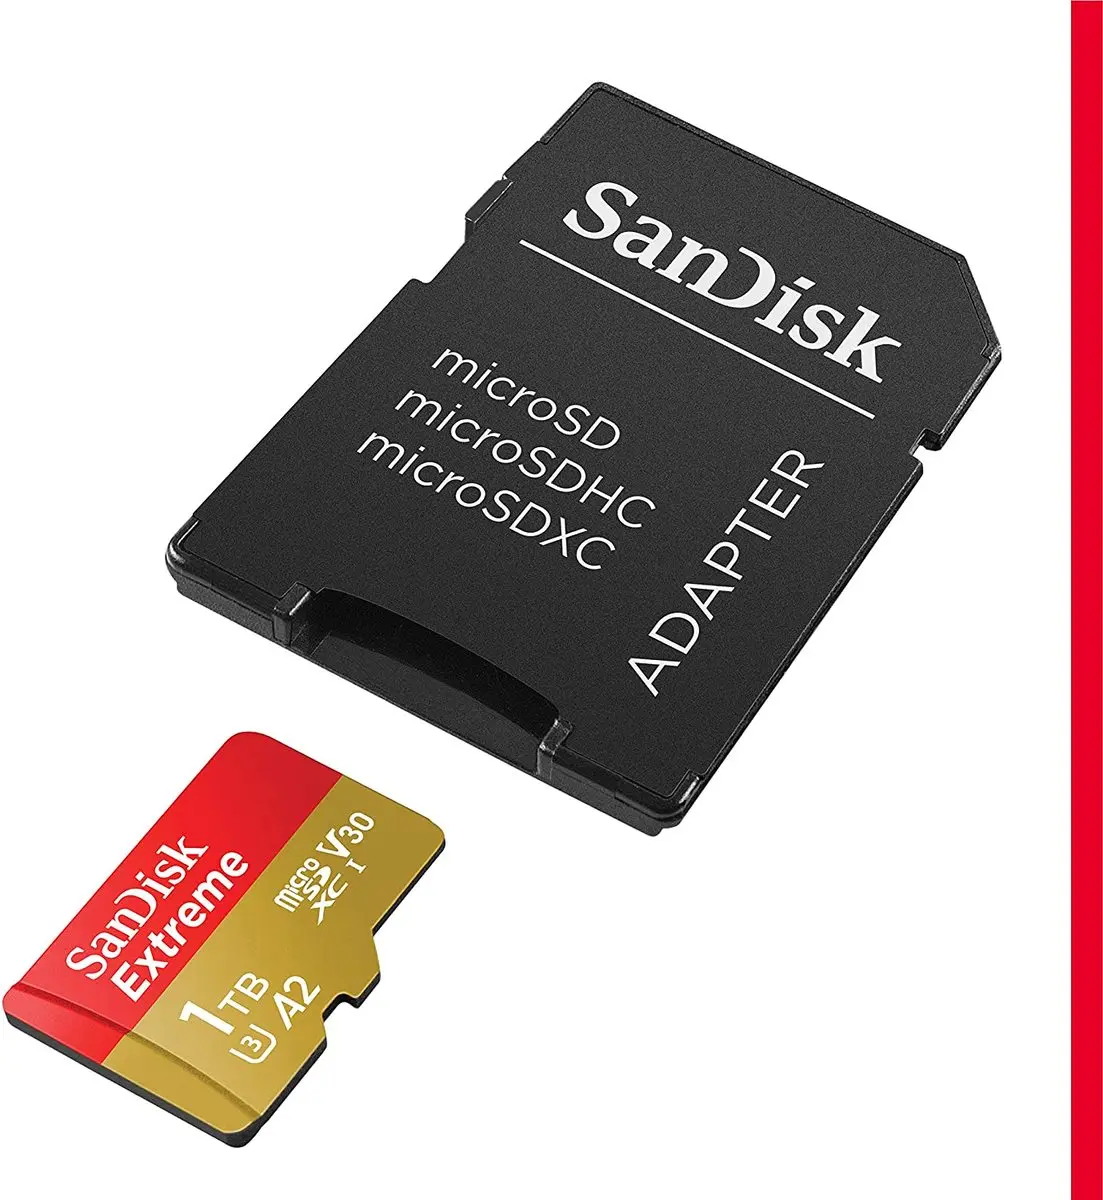 1. Sandisk Extreme A2 1TB(U3)V30 160mb M.SD adapter